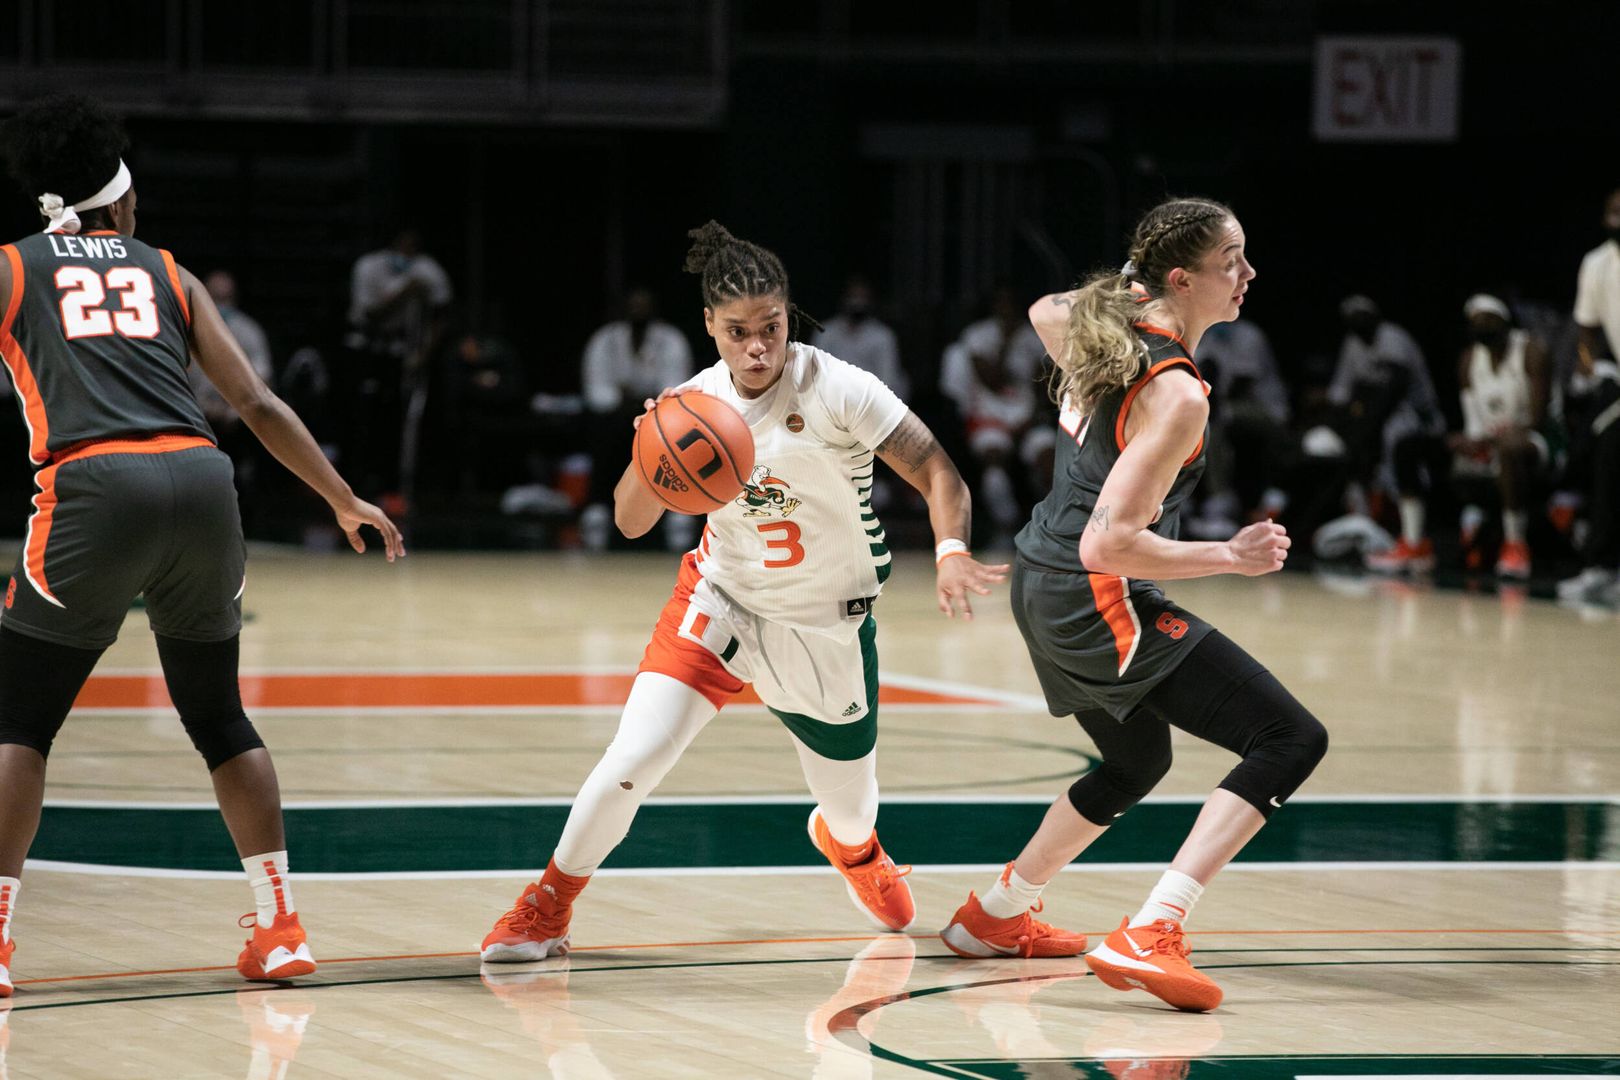 Canes Fall to Orange in ACC Opener